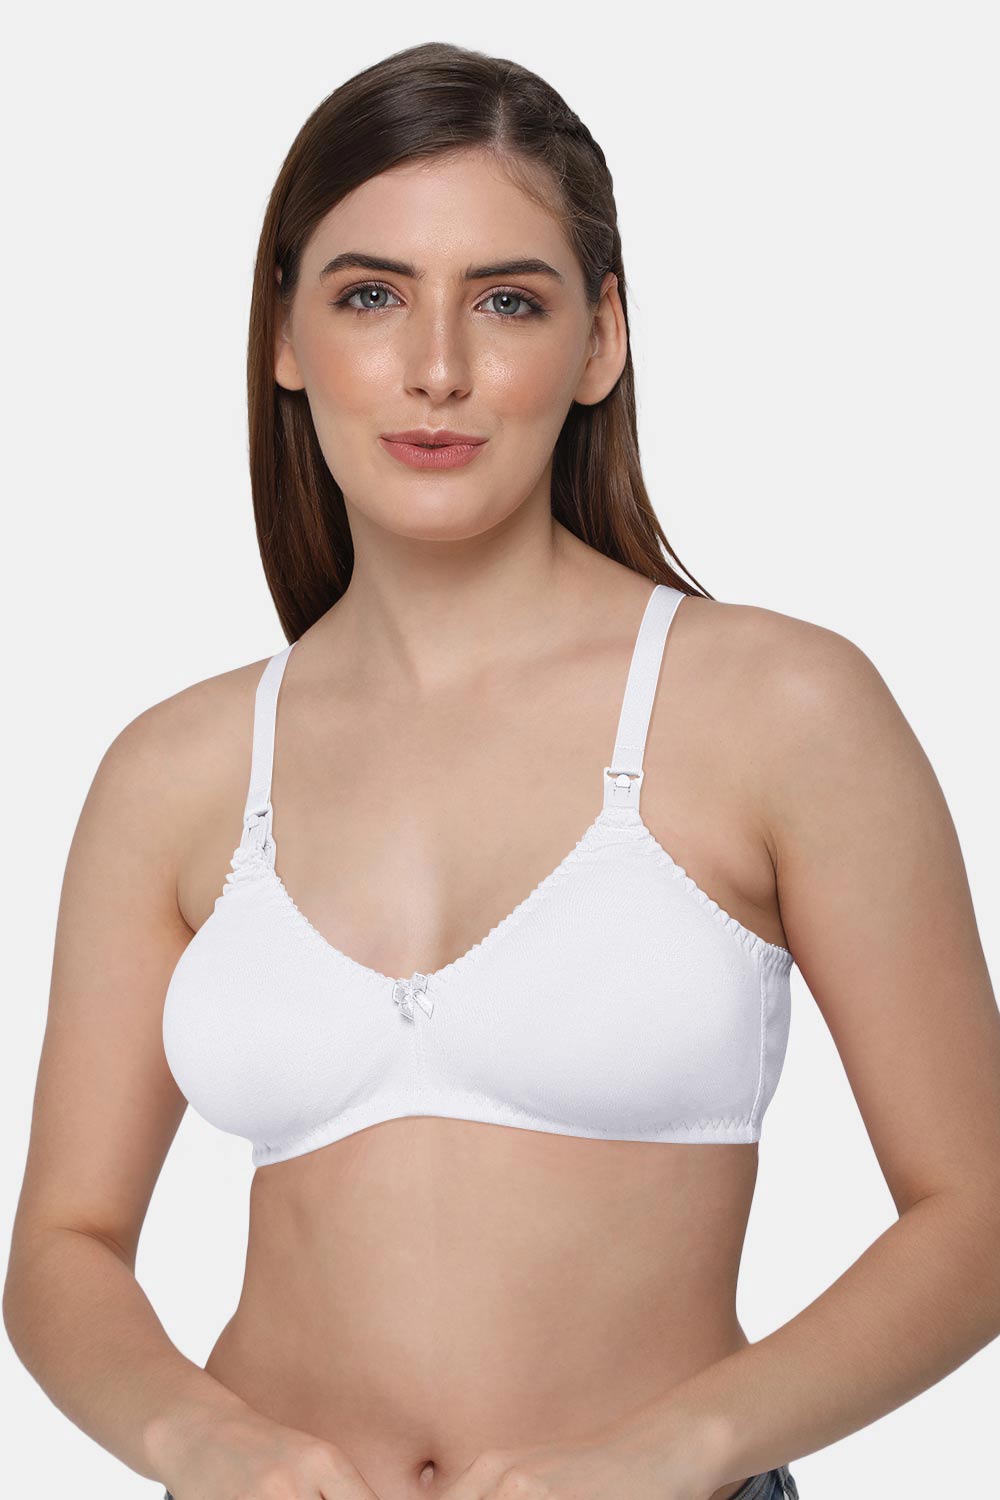 Buy INTIMACY LINGERIE Women's Cotton Brassiere, Non-Padded, Non-Wired, Full Coverage, Side Shaper Panel to Give Minimize Look Regular Bra, 2  Piece